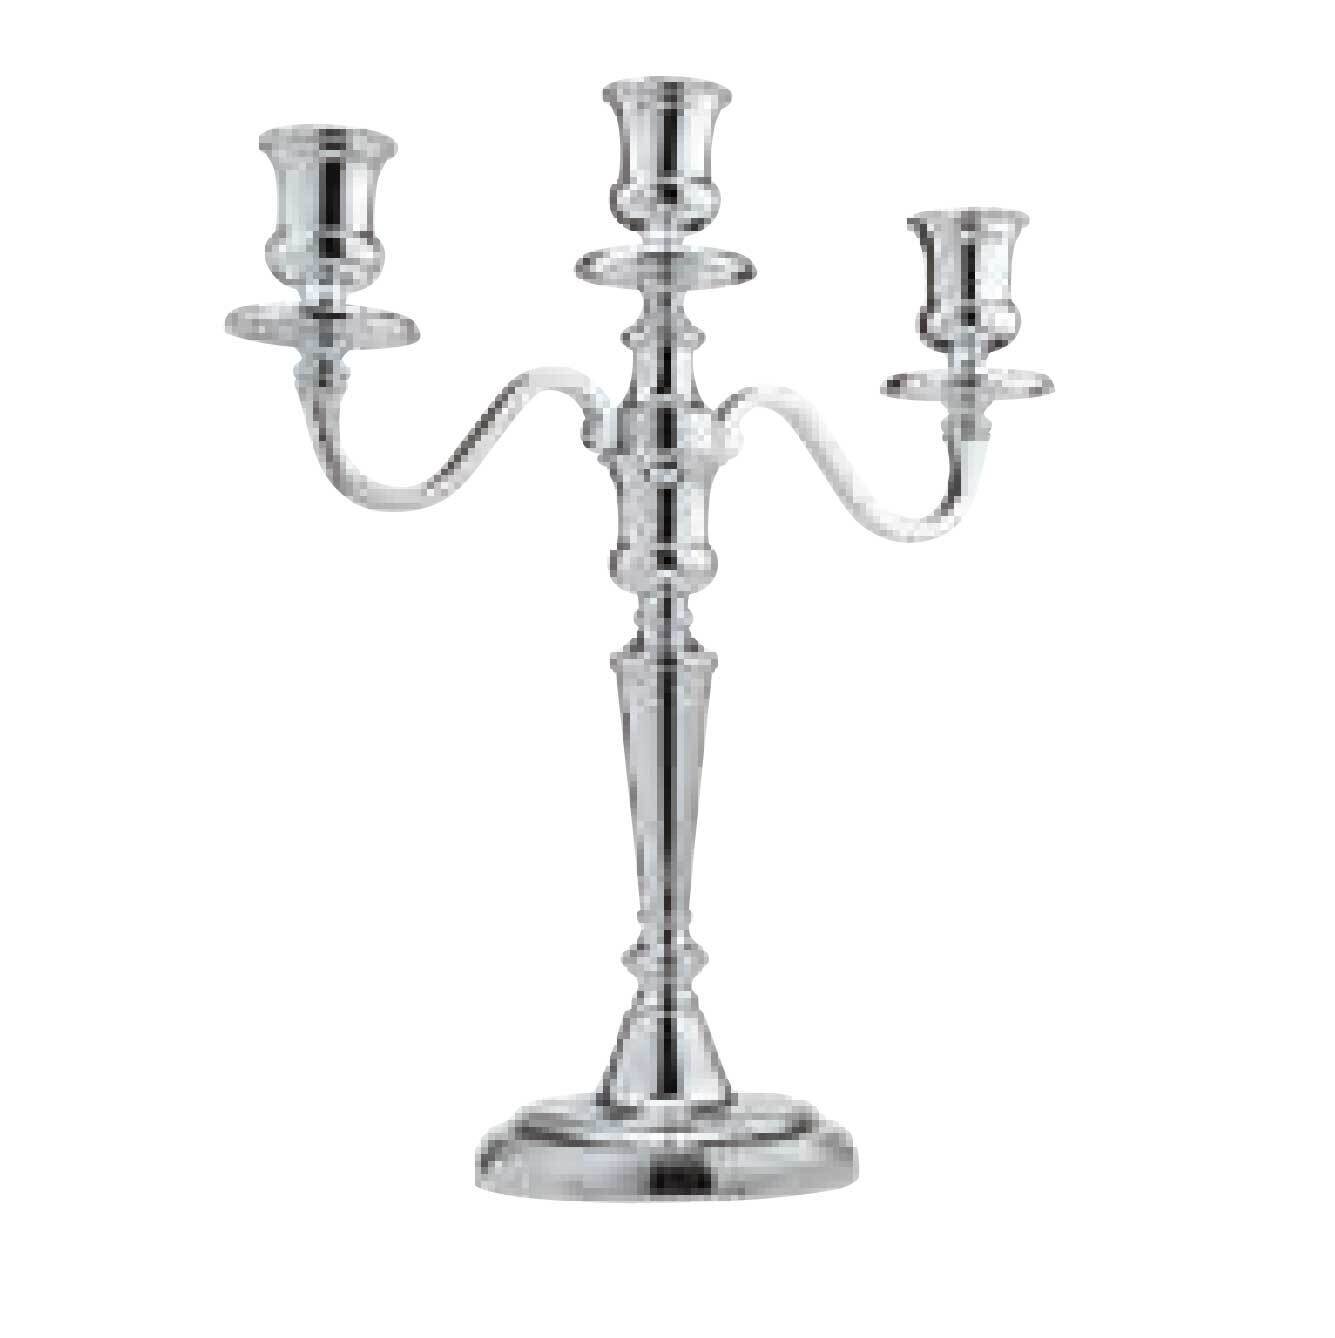 Ercuis Rencontre Candelabra 3 Lights 12.625 Inch Silver Plated F522503-04